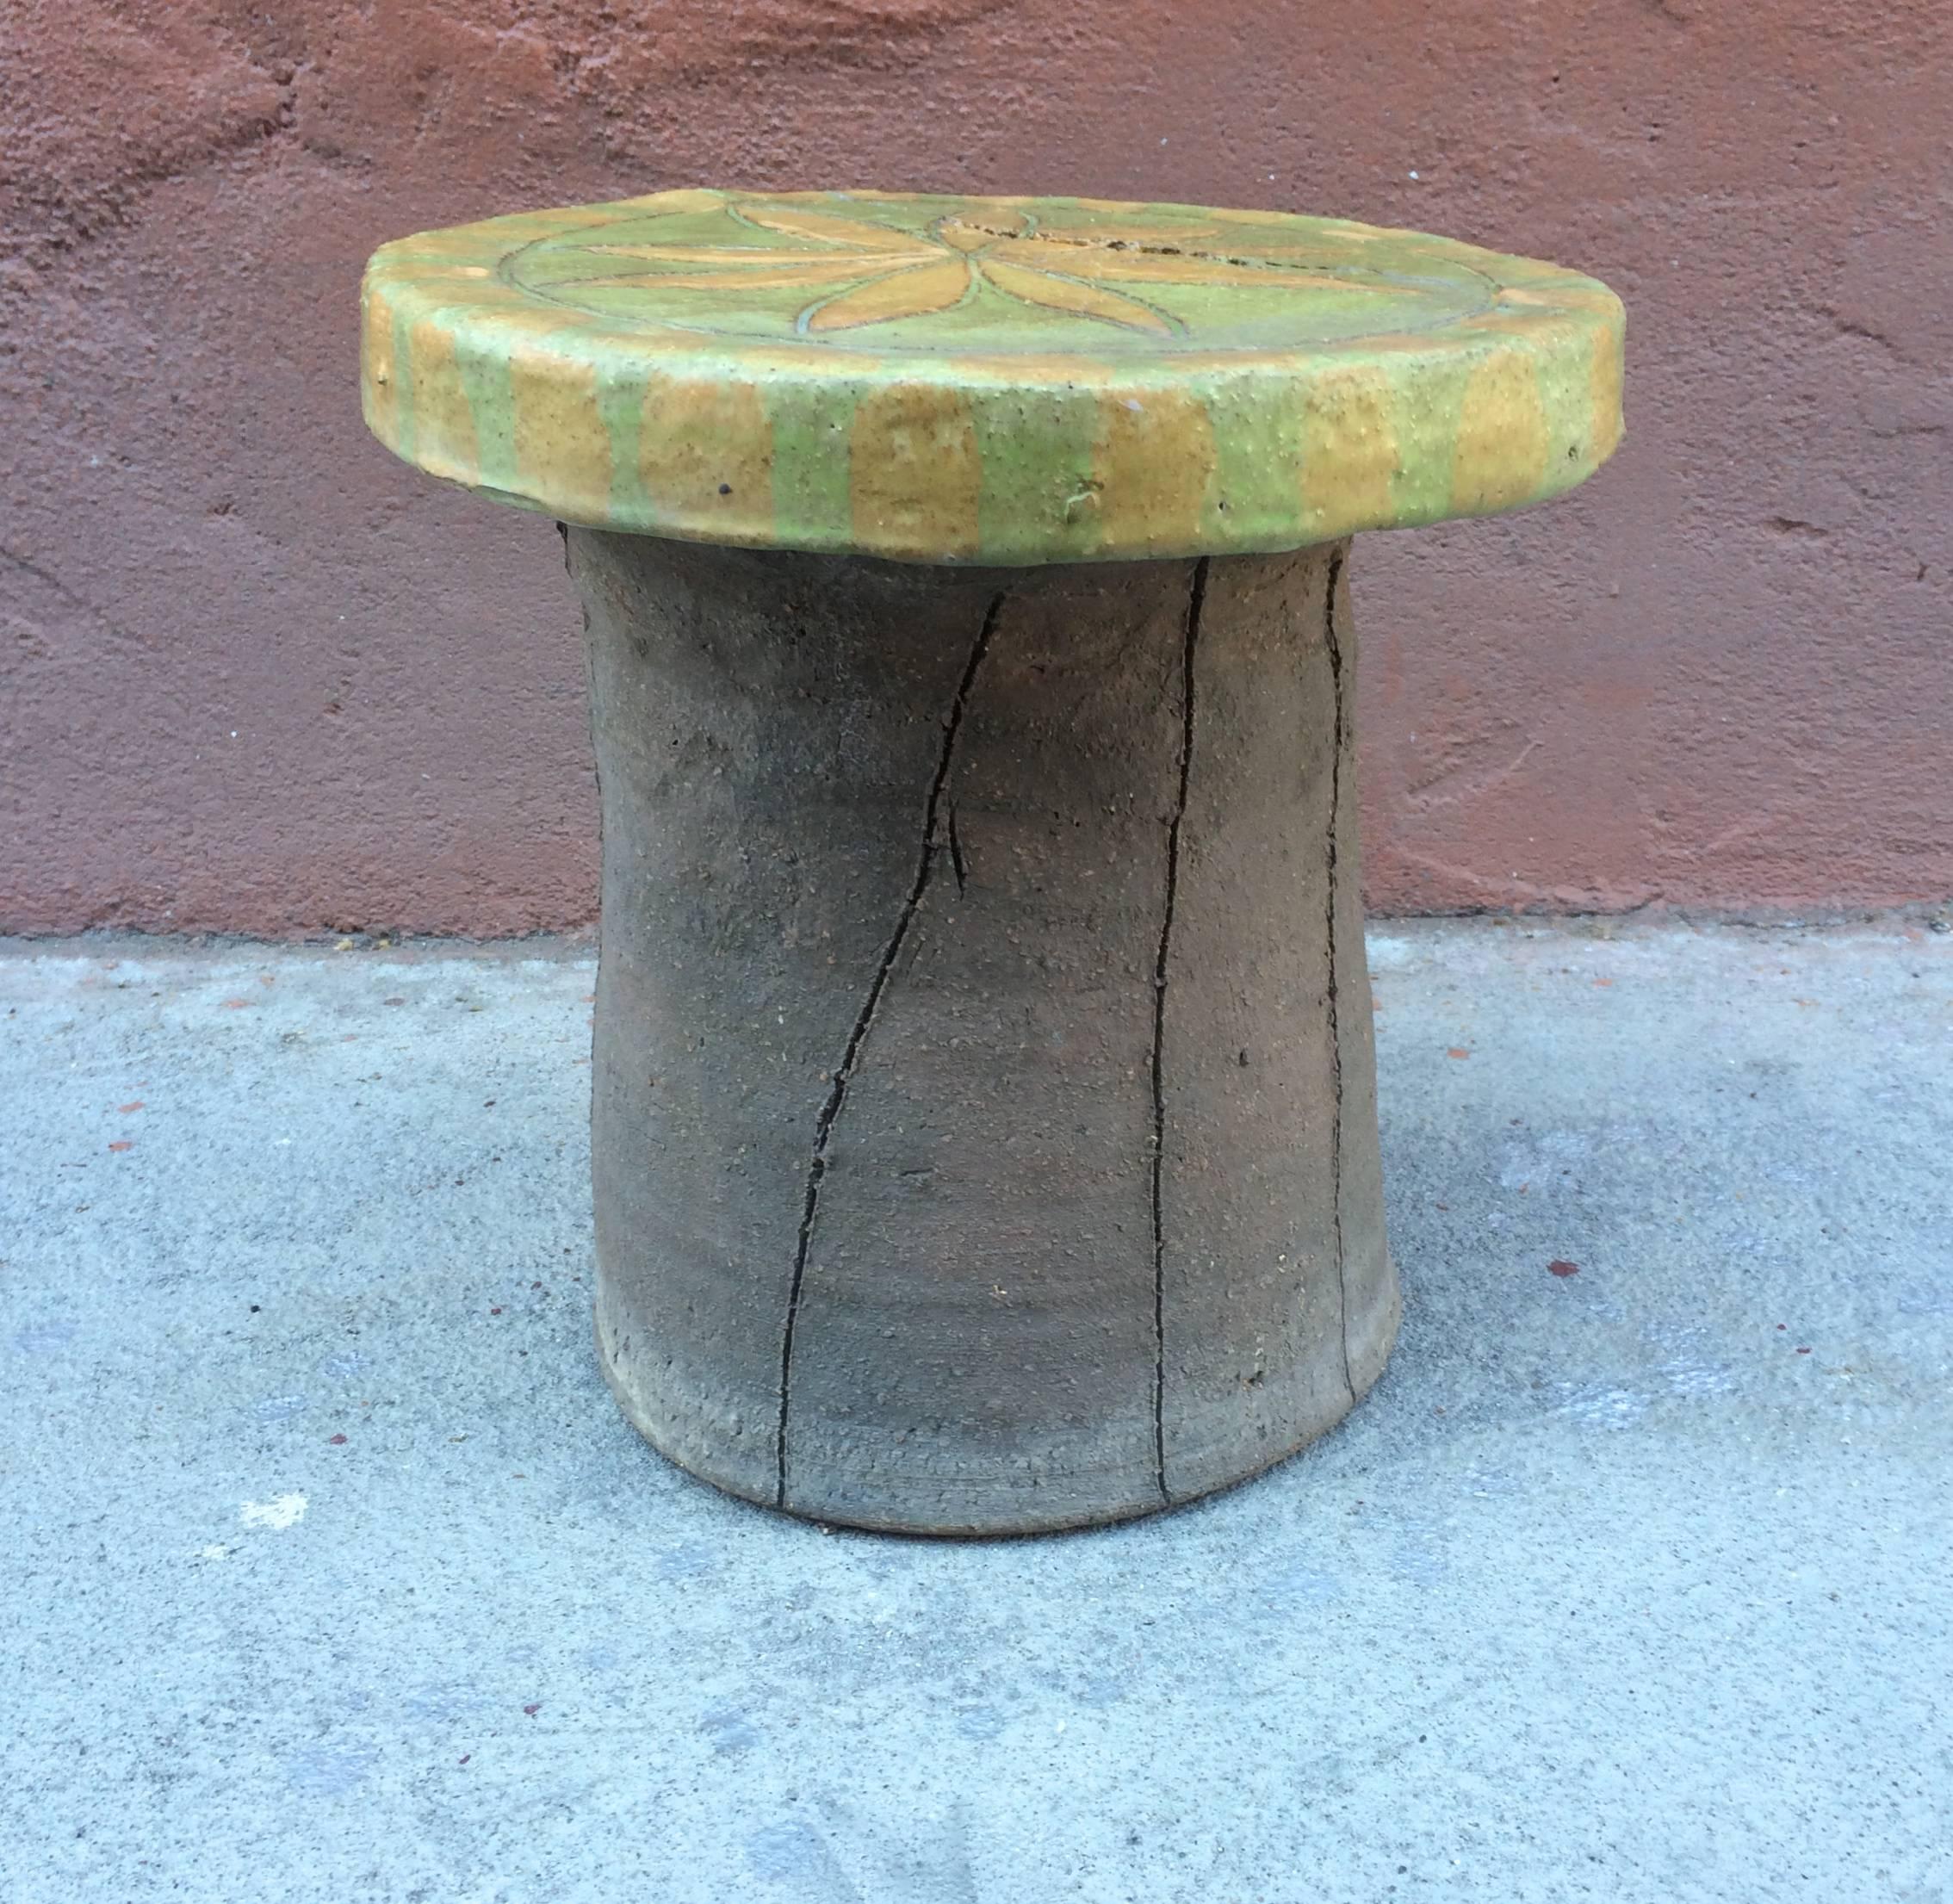 Ceramic flower stool by California ceramic artist Stan Bitters for Hans Sumpf, this appears to be an earlier example and may have been part of Bitters developing technique as this example has a firing crack which does not affect the structural